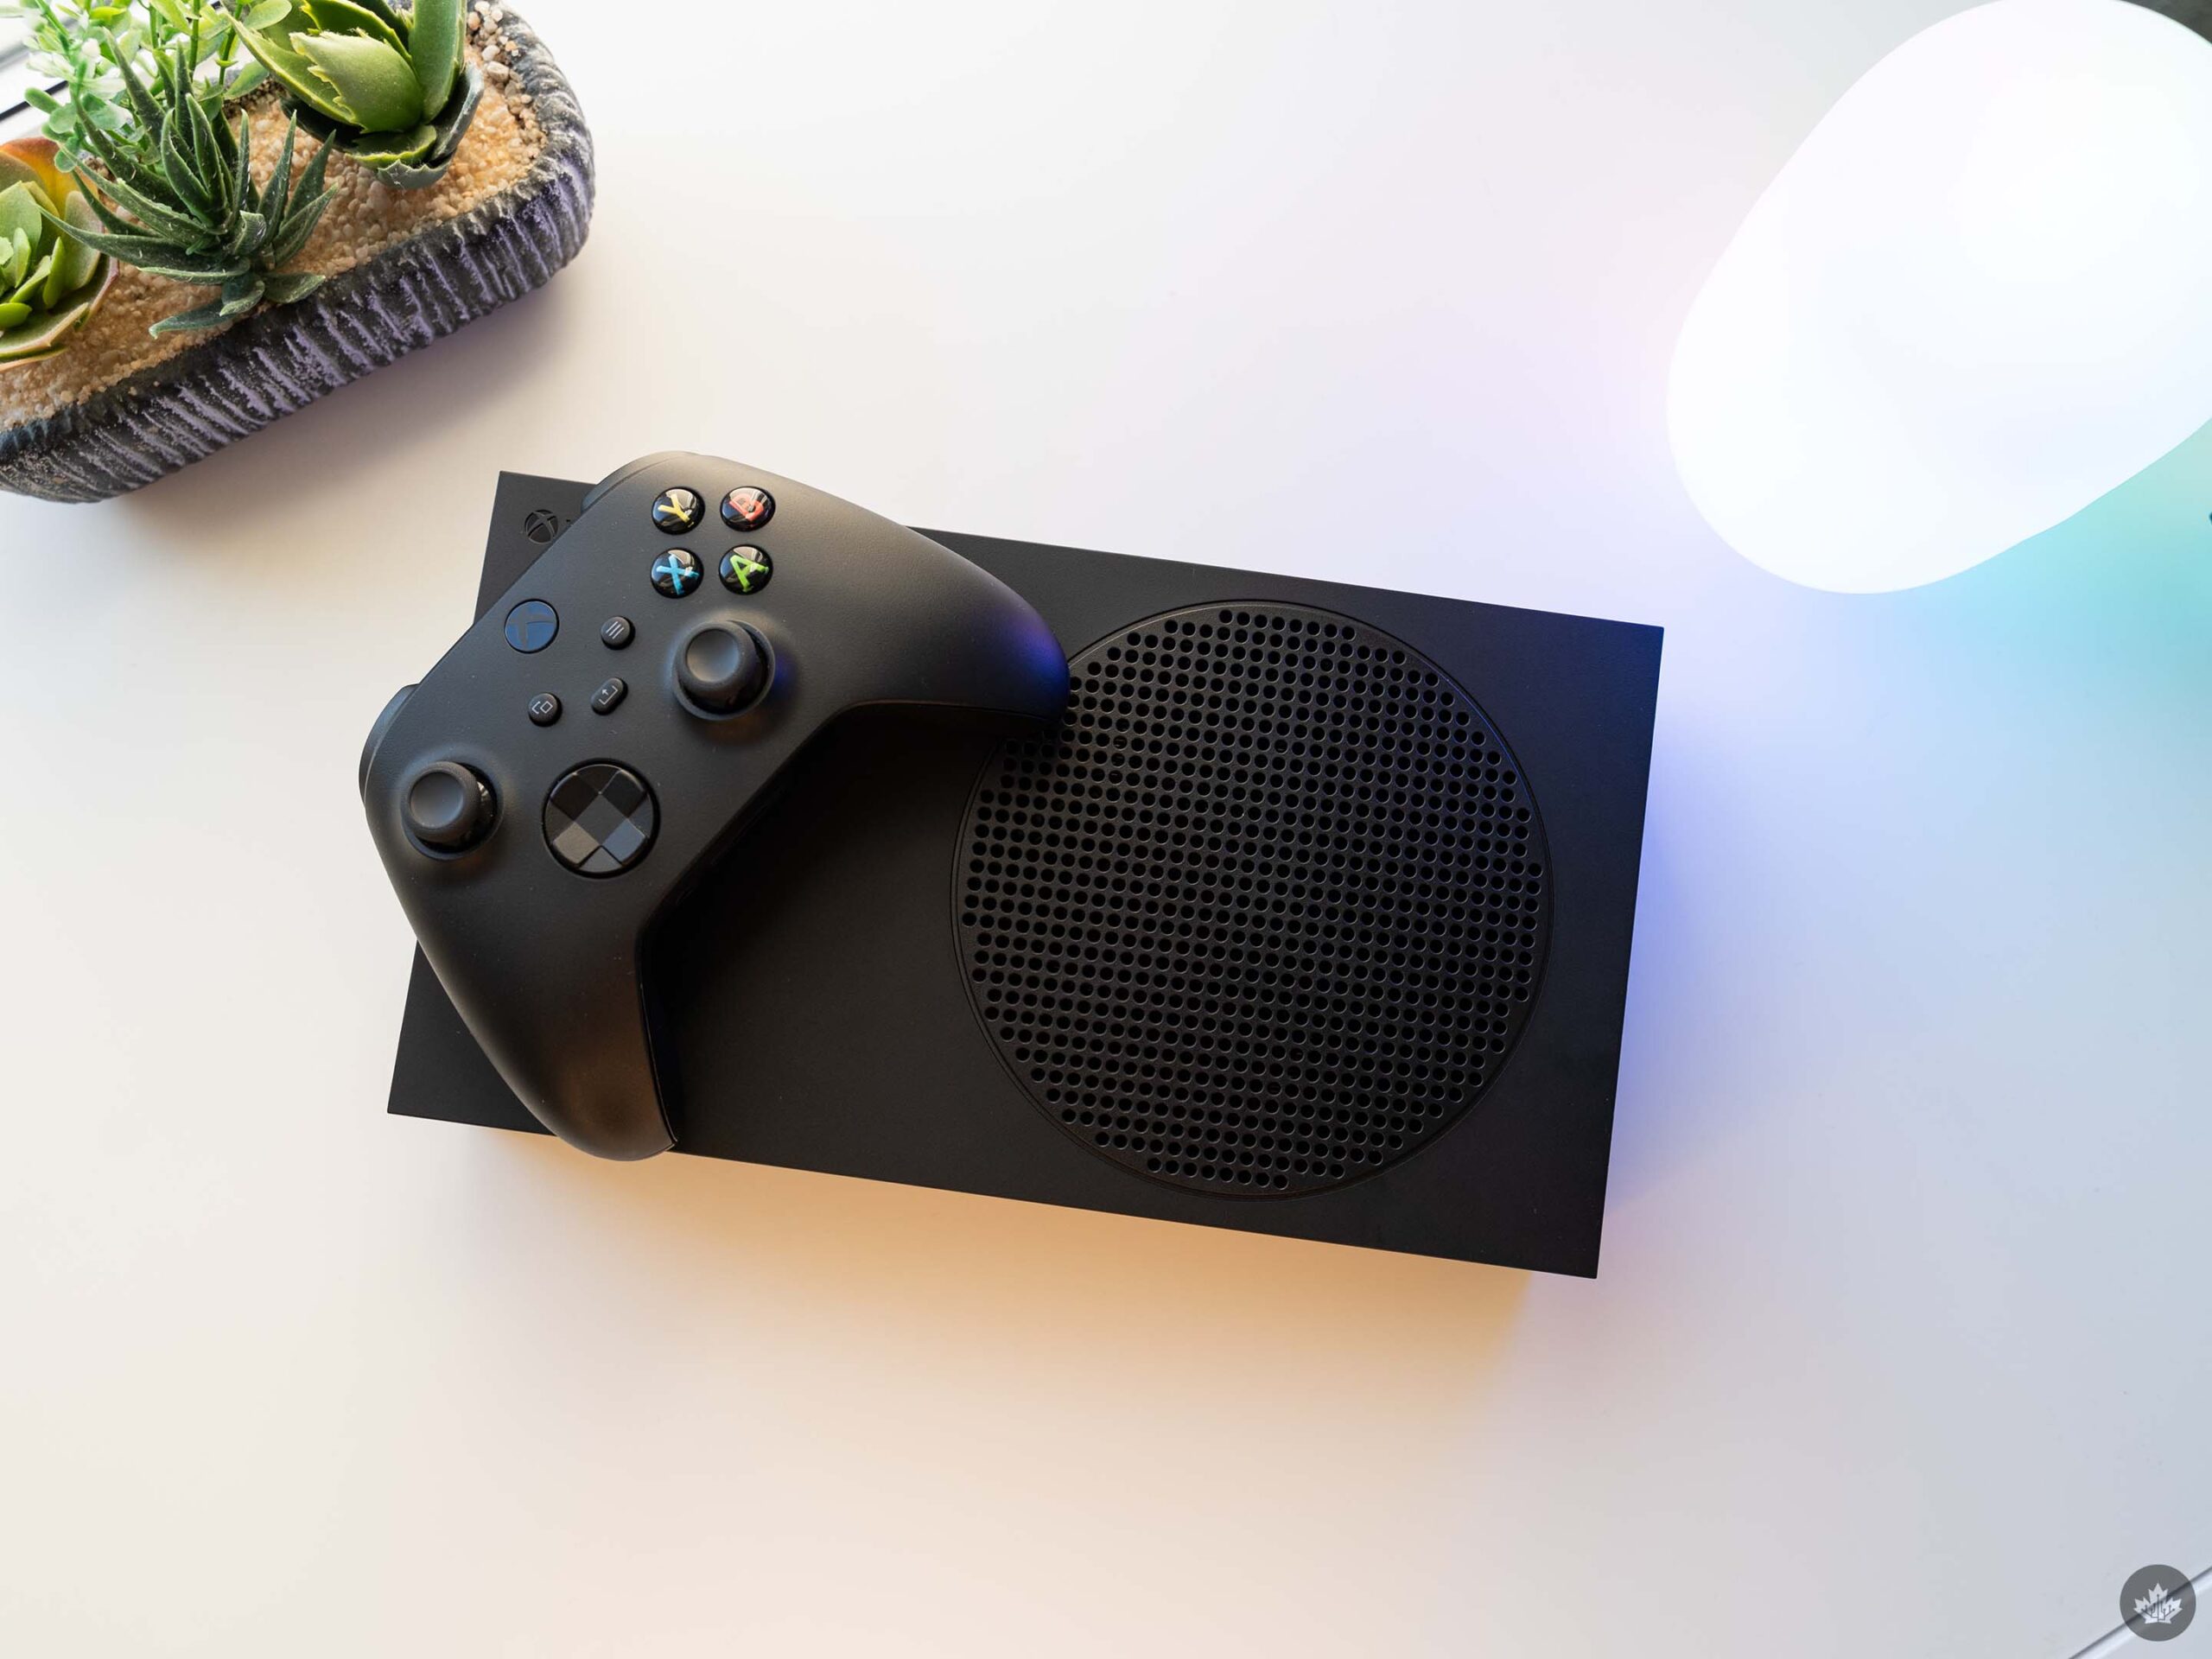 A PC gamer's Xbox Series X review… should you buy one?